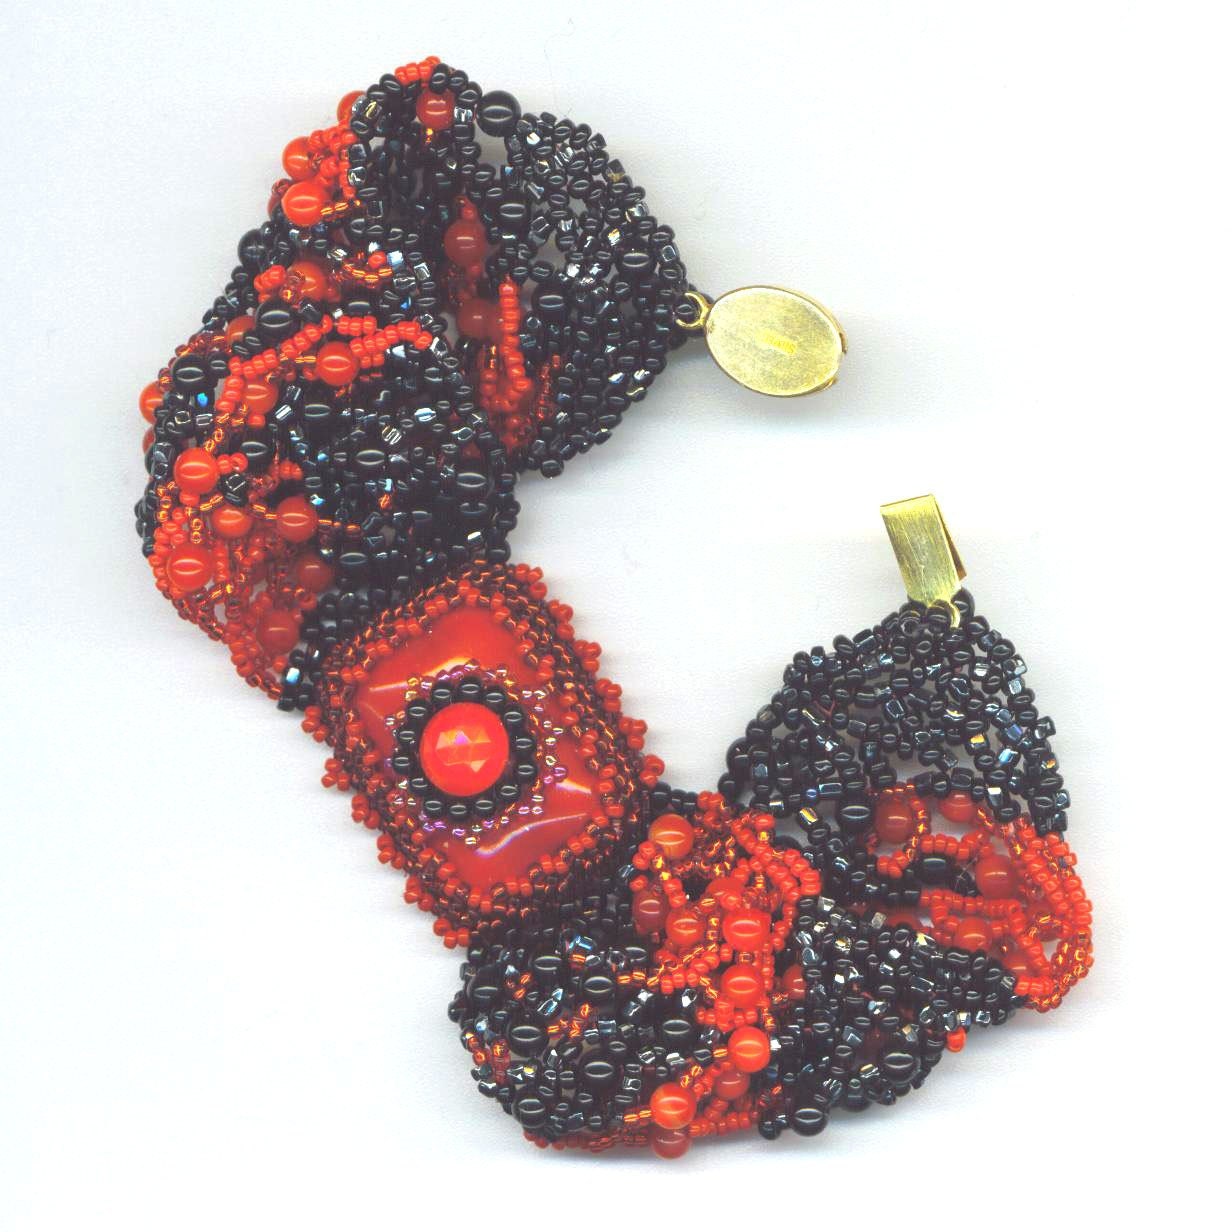 Beadwoven Freeform Cuff Bracelet Statement Bracelet Bold Scarlet Red& Black Cuff Red Black Bracelet Gift for Her by enchantedbeads on Etsy